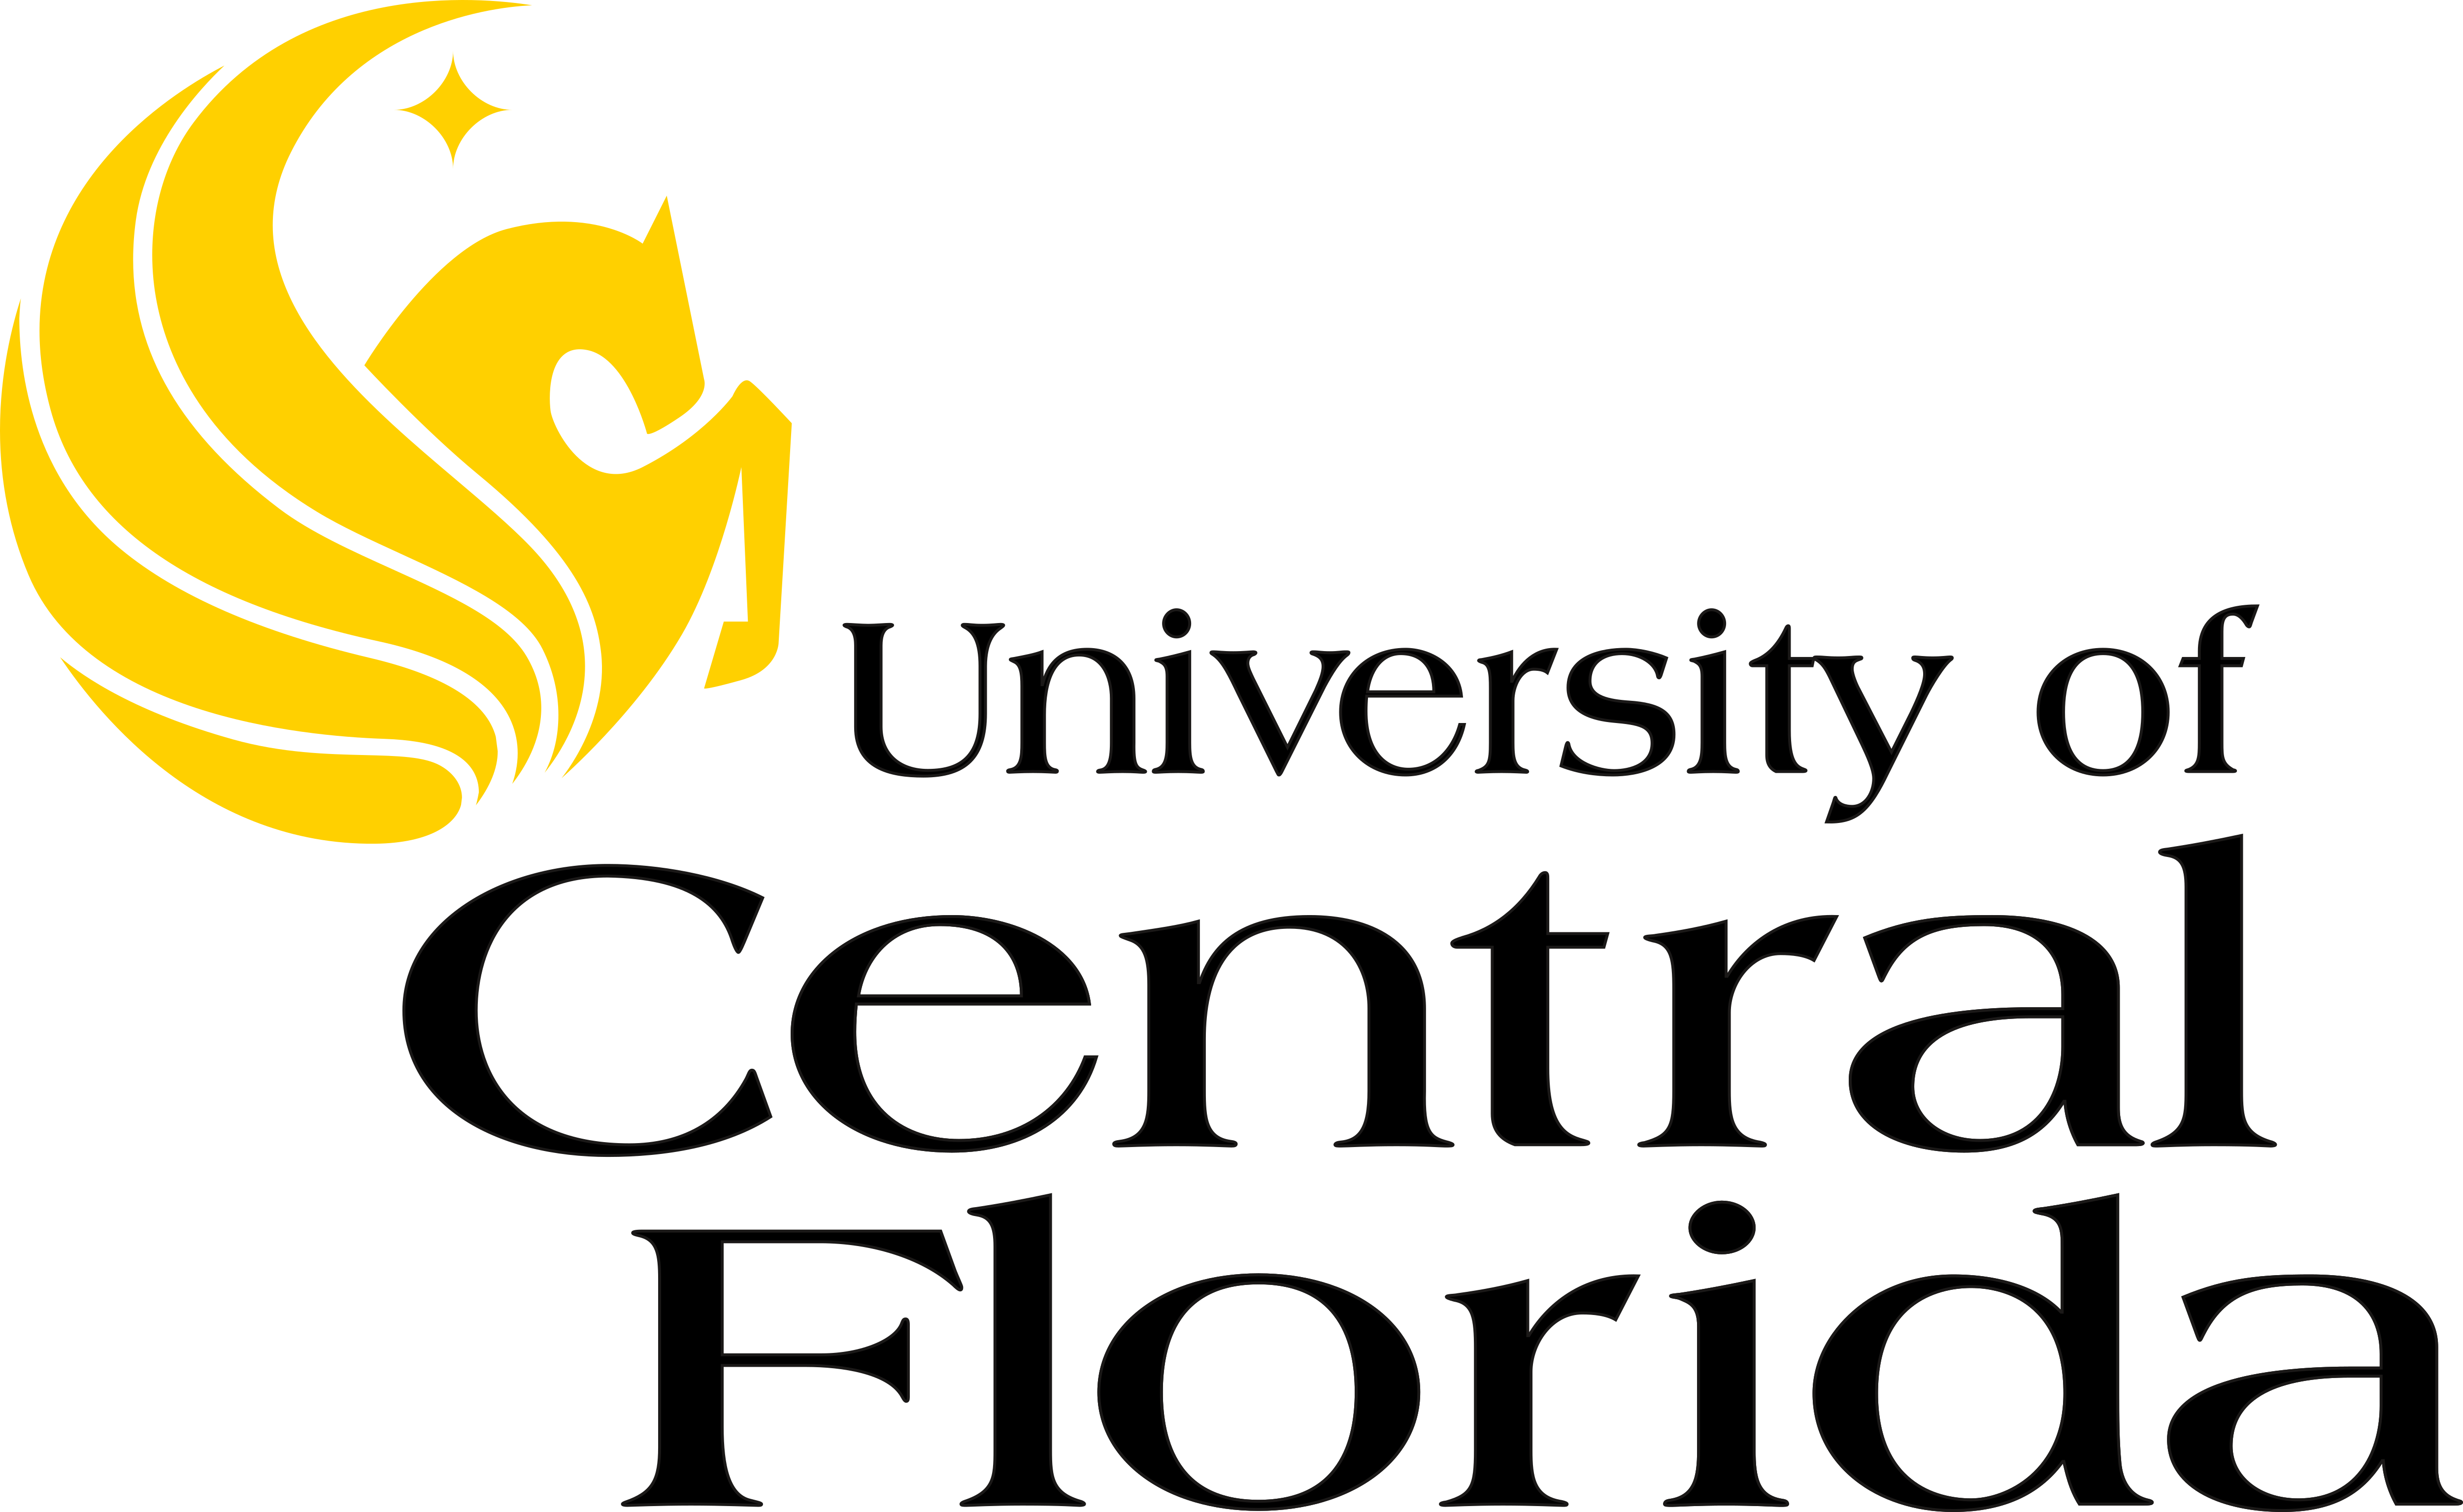 university of central florida essay prompts